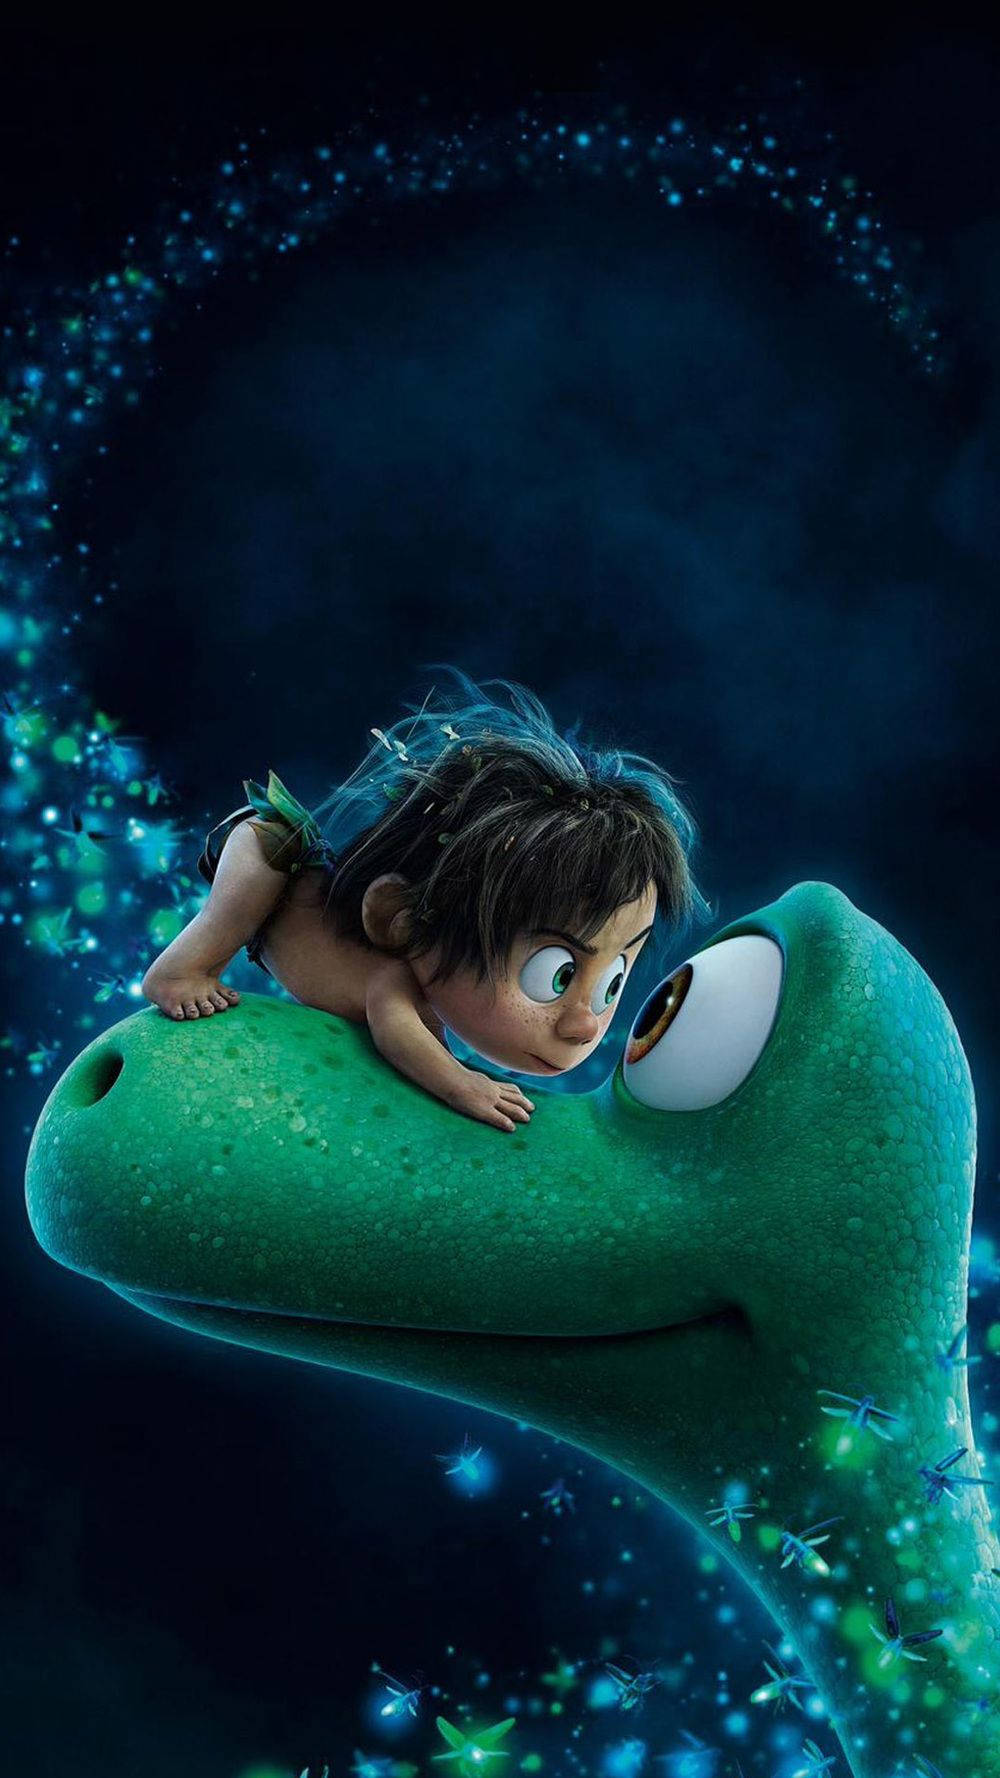 The Good Dinosaur: Downloadable Wallpaper For Ios & Android Phones Wallpaper